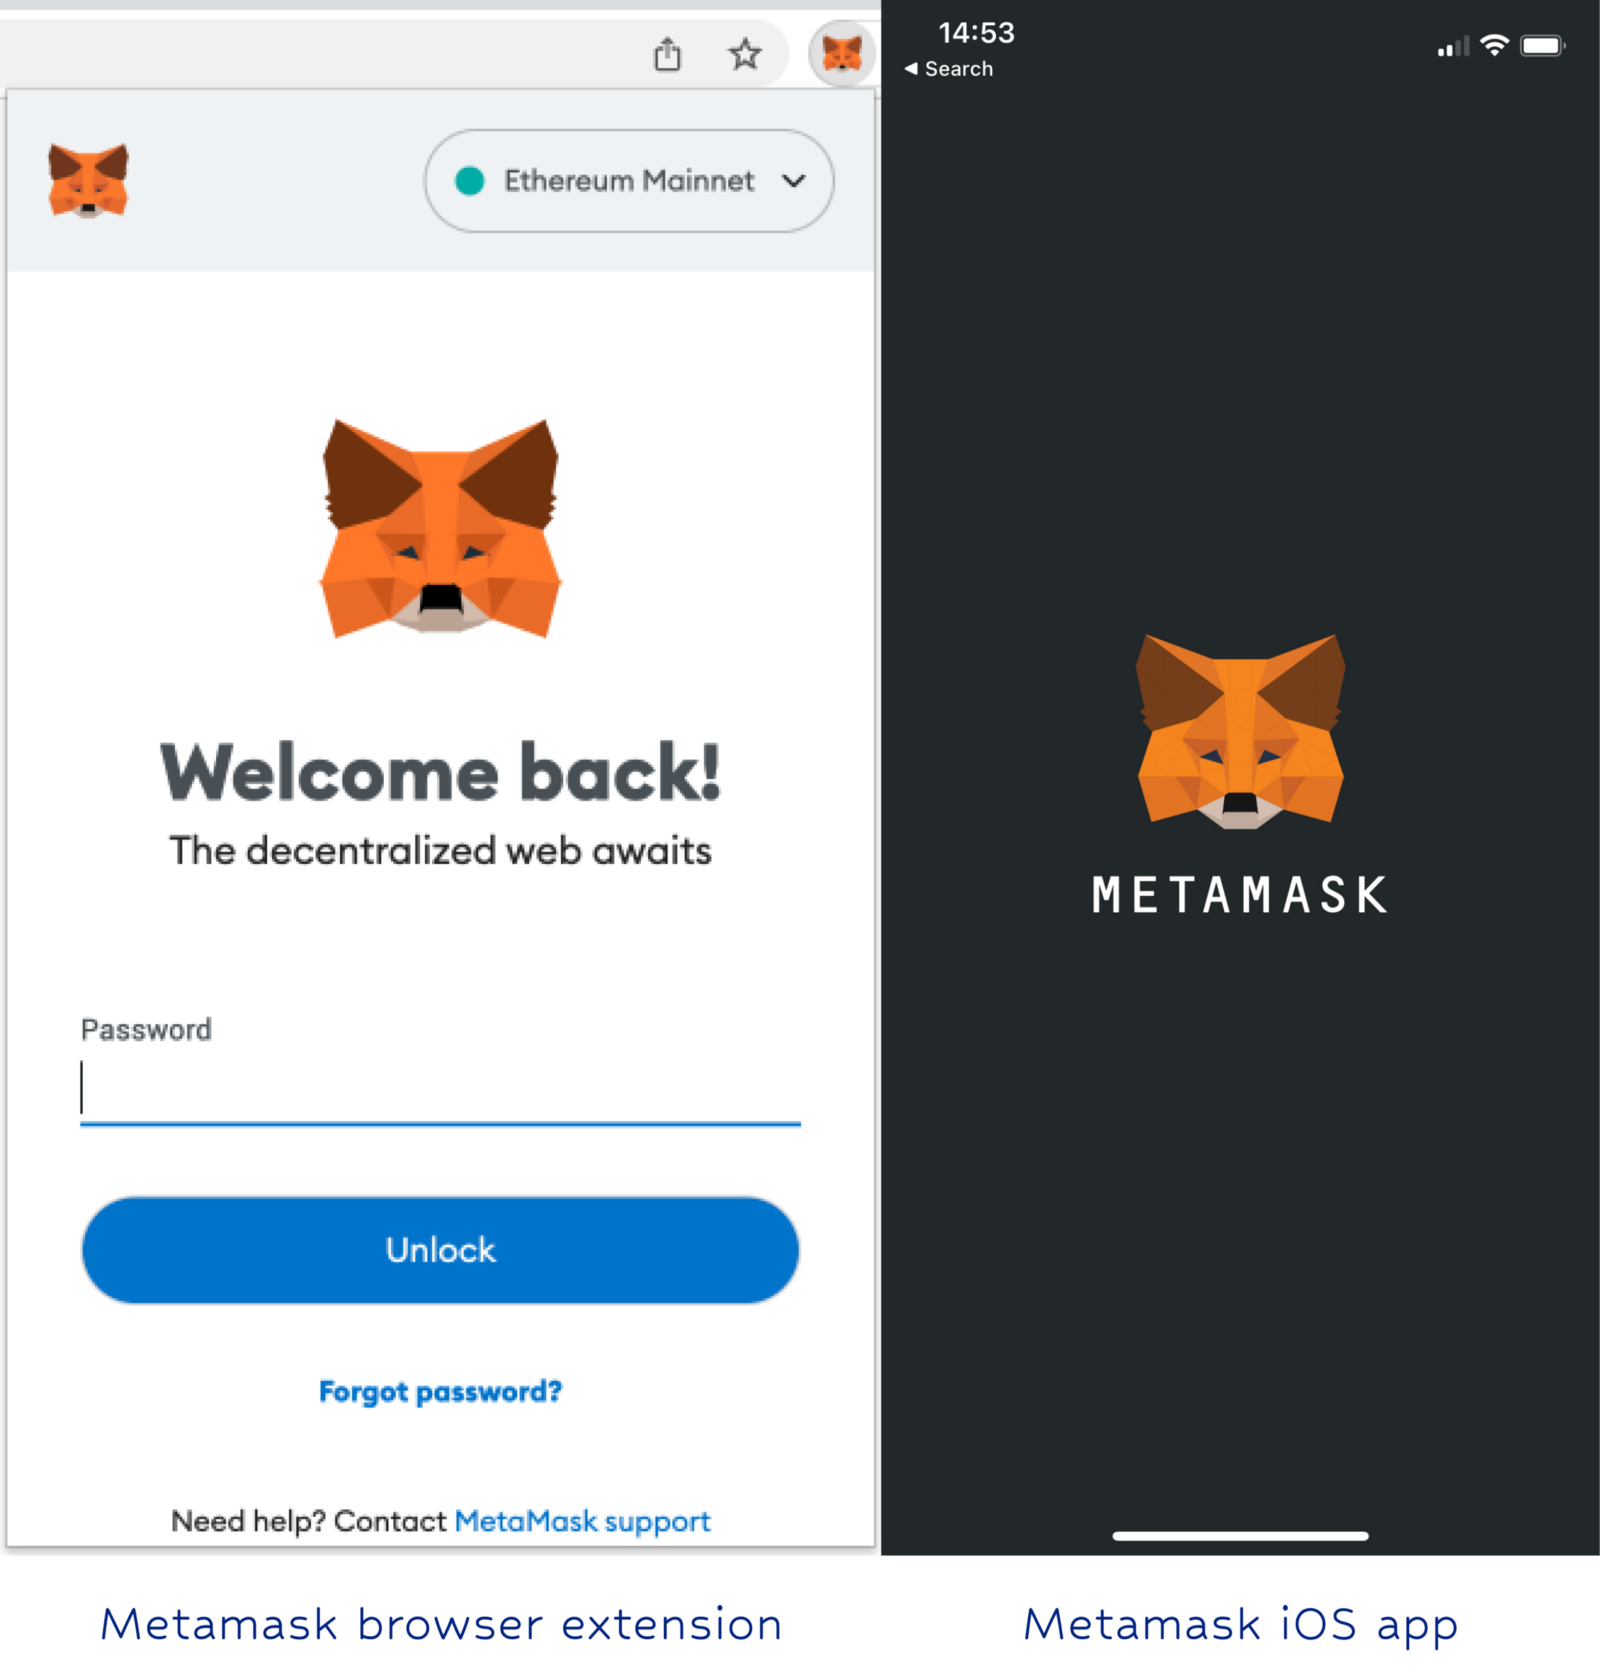 A wallet is a piece of software. Here you see the Metamask browser extension (left, for Google Chrome) and Metamask iOS app (right). Upon entering, you will need to key in a password or use biometric authentication.